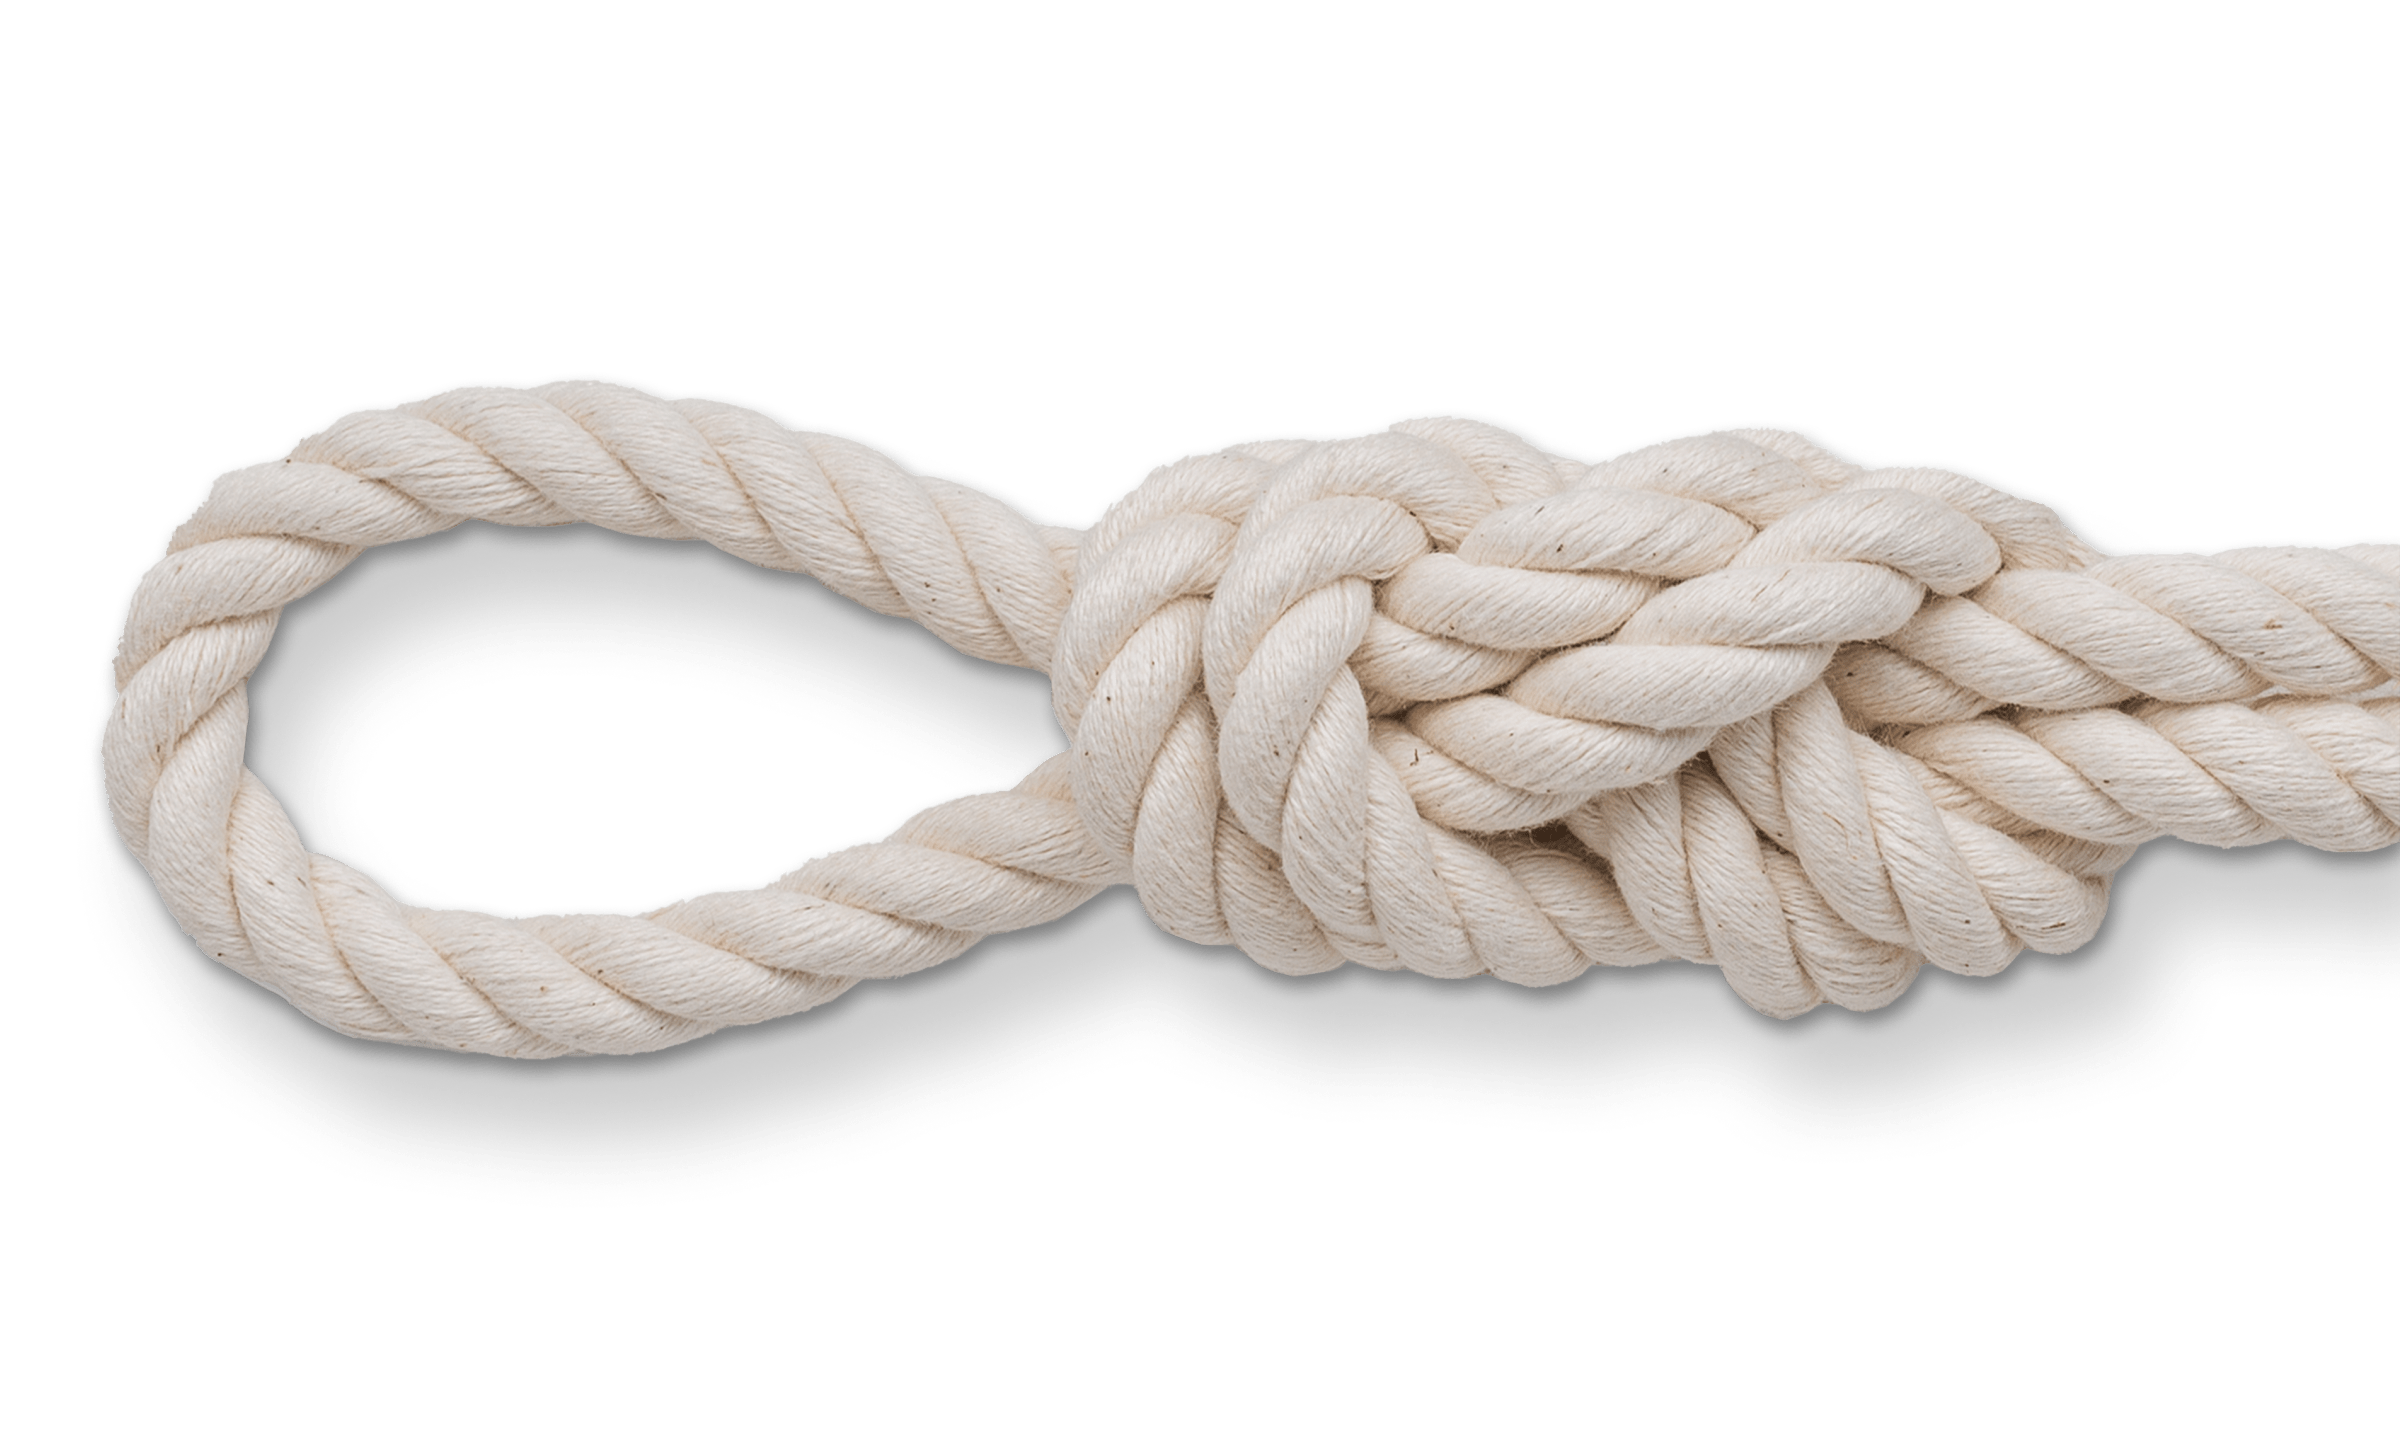 Natural Twisted Cotton Rope - Soft But Strong - Assorted Colors - 1/2 inch Diameter (Blue, 100 Feet)